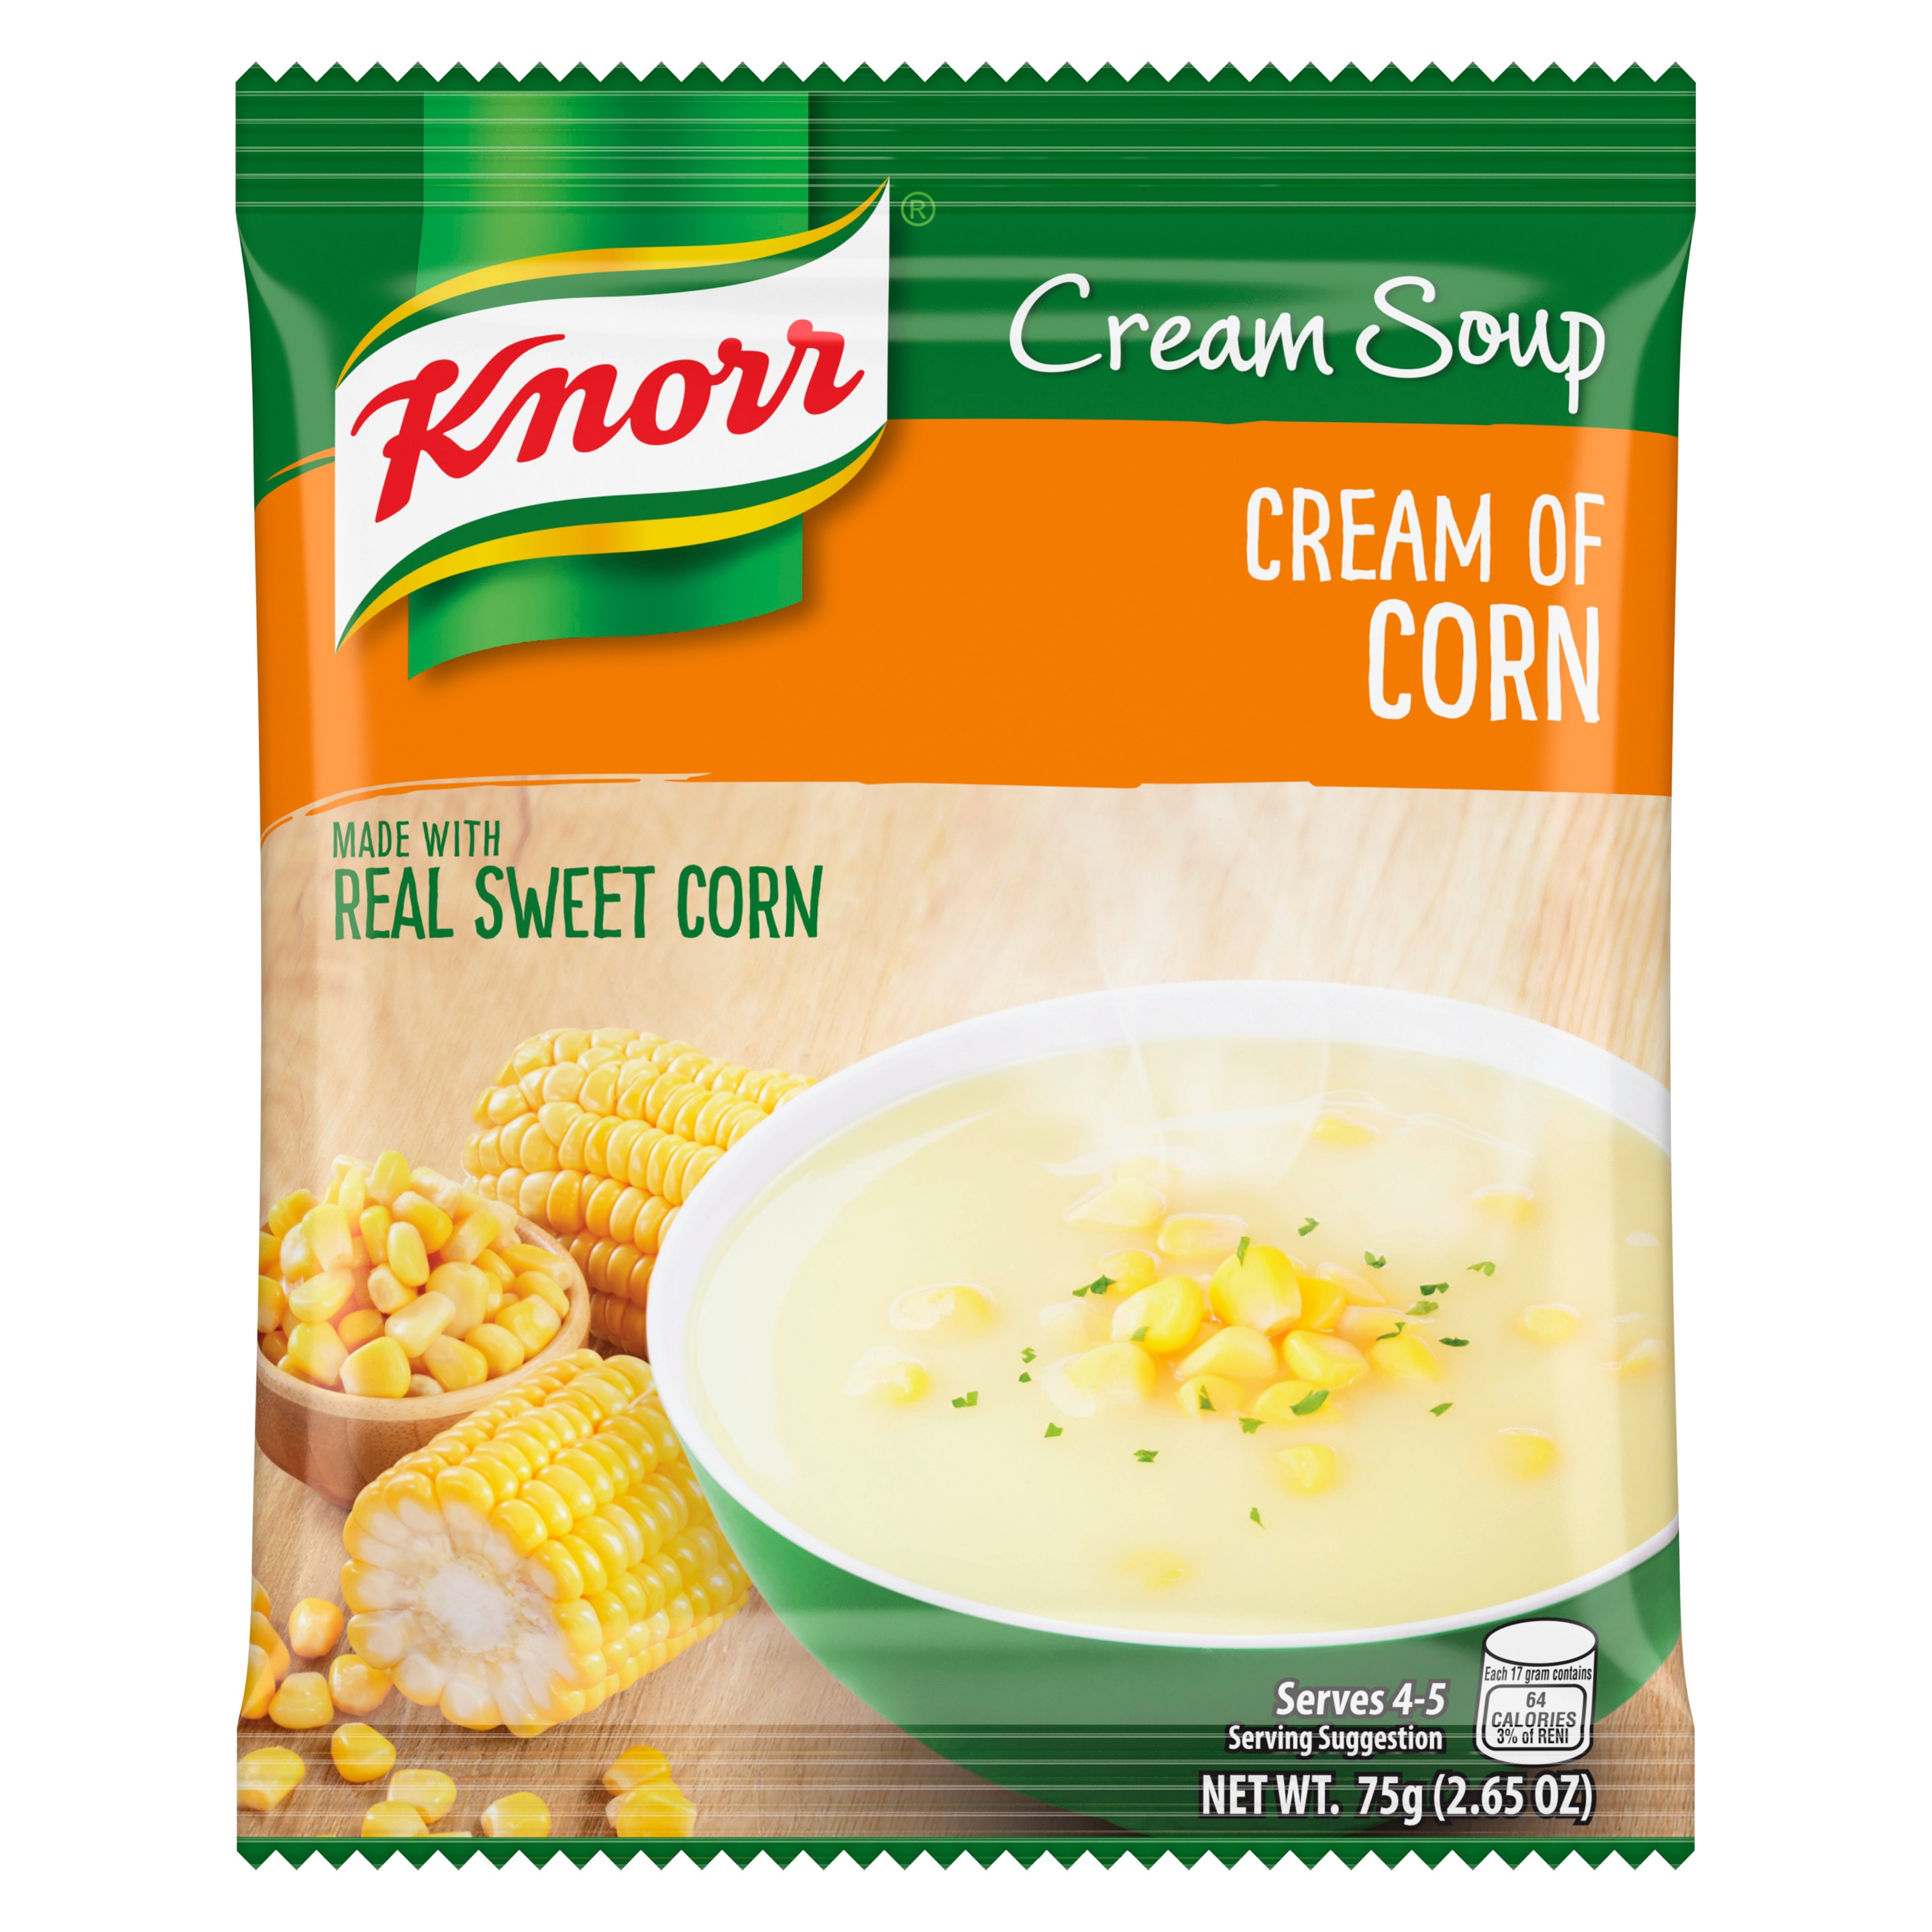 A packet of Knorr Cream of Corn Soup